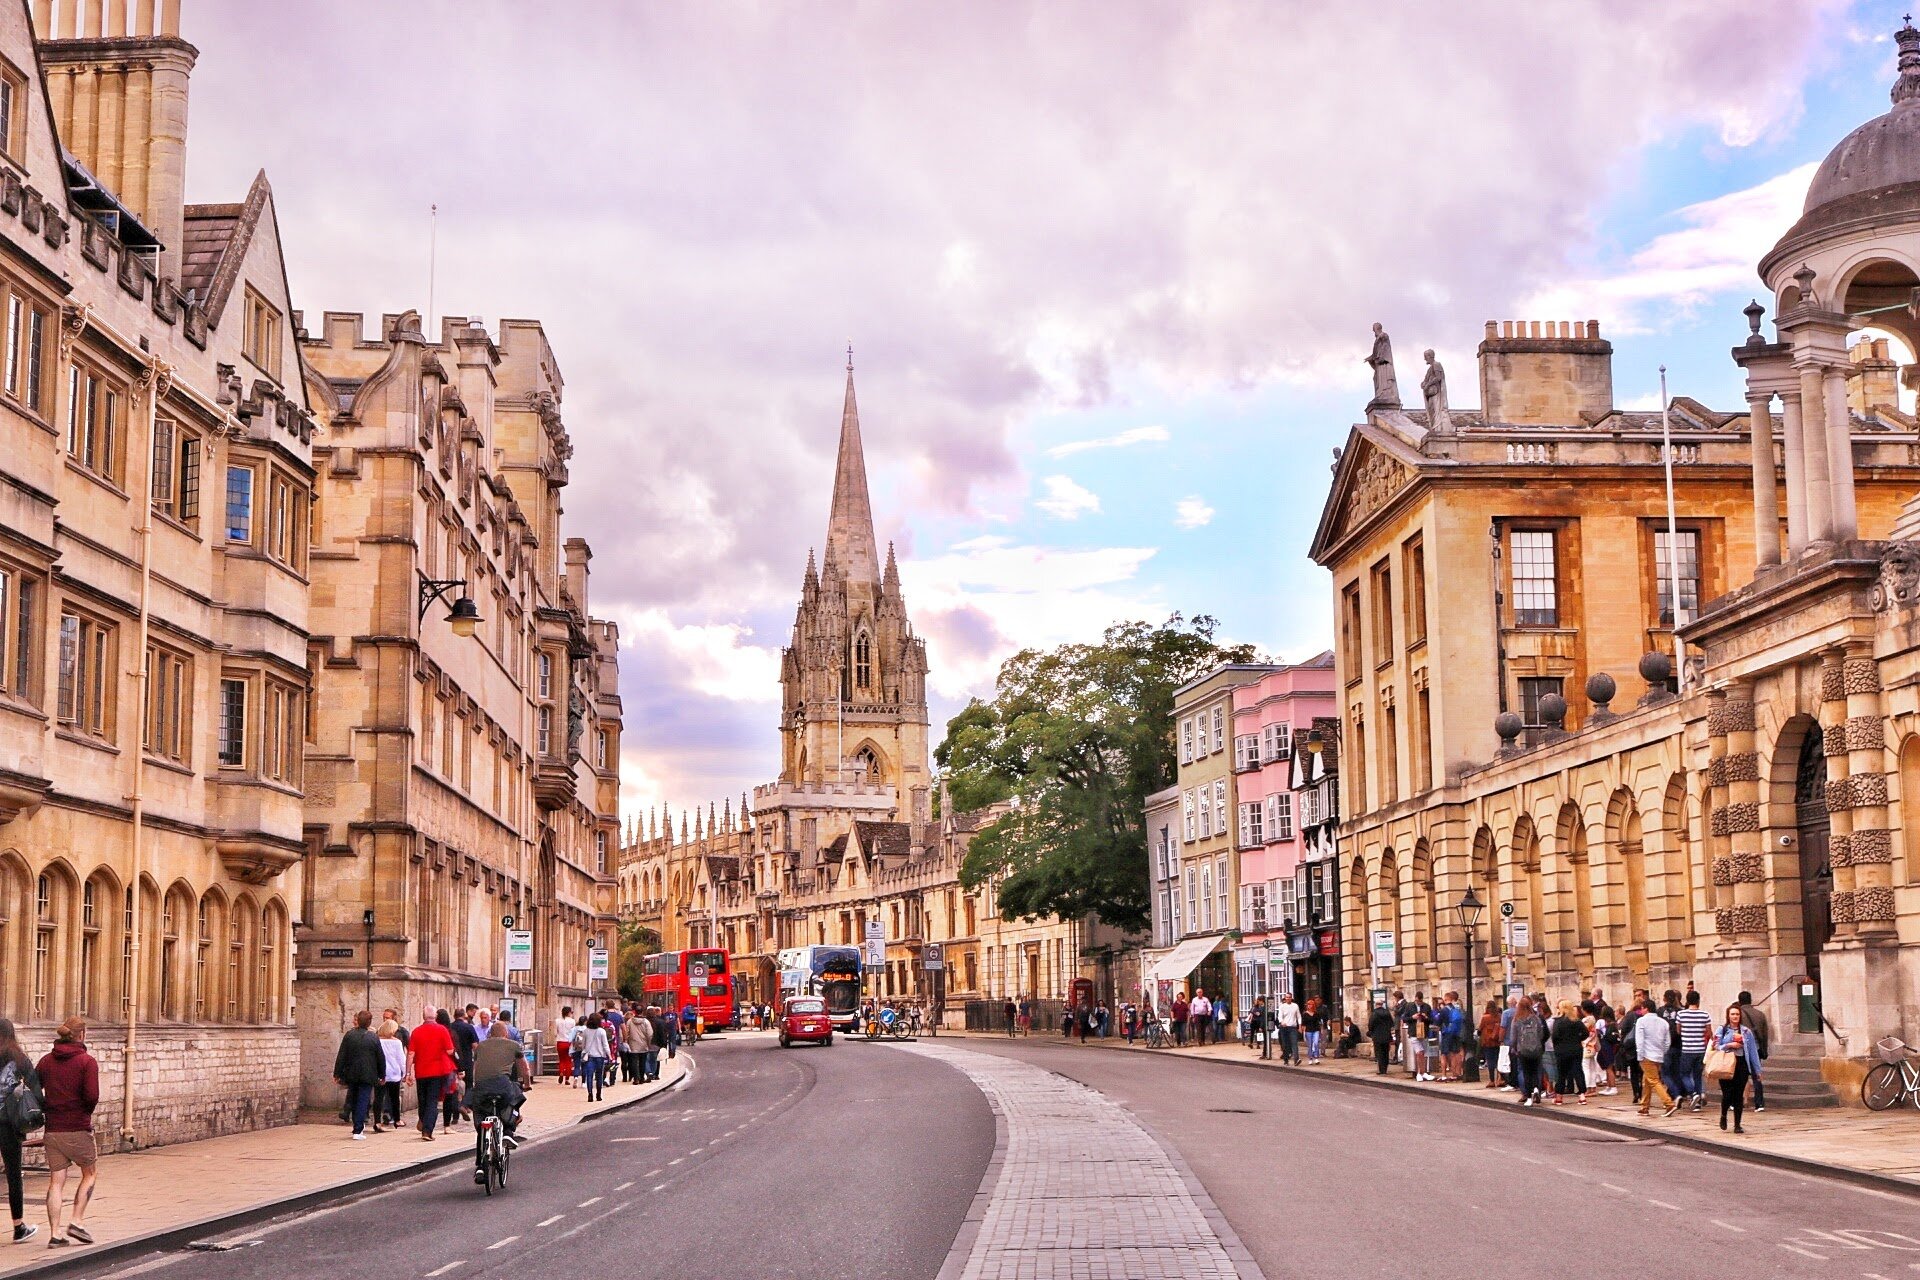 24 hours in Oxford: An Oxford Day Trip Itinerary | Helena Bradbury Travel Blogger | Oxford day trip | day trip to Oxford | Oxford travel guide | Oxford day trip itinerary | Things to see and do | where to eat | best pubs in Oxford | Oxford itinerary…